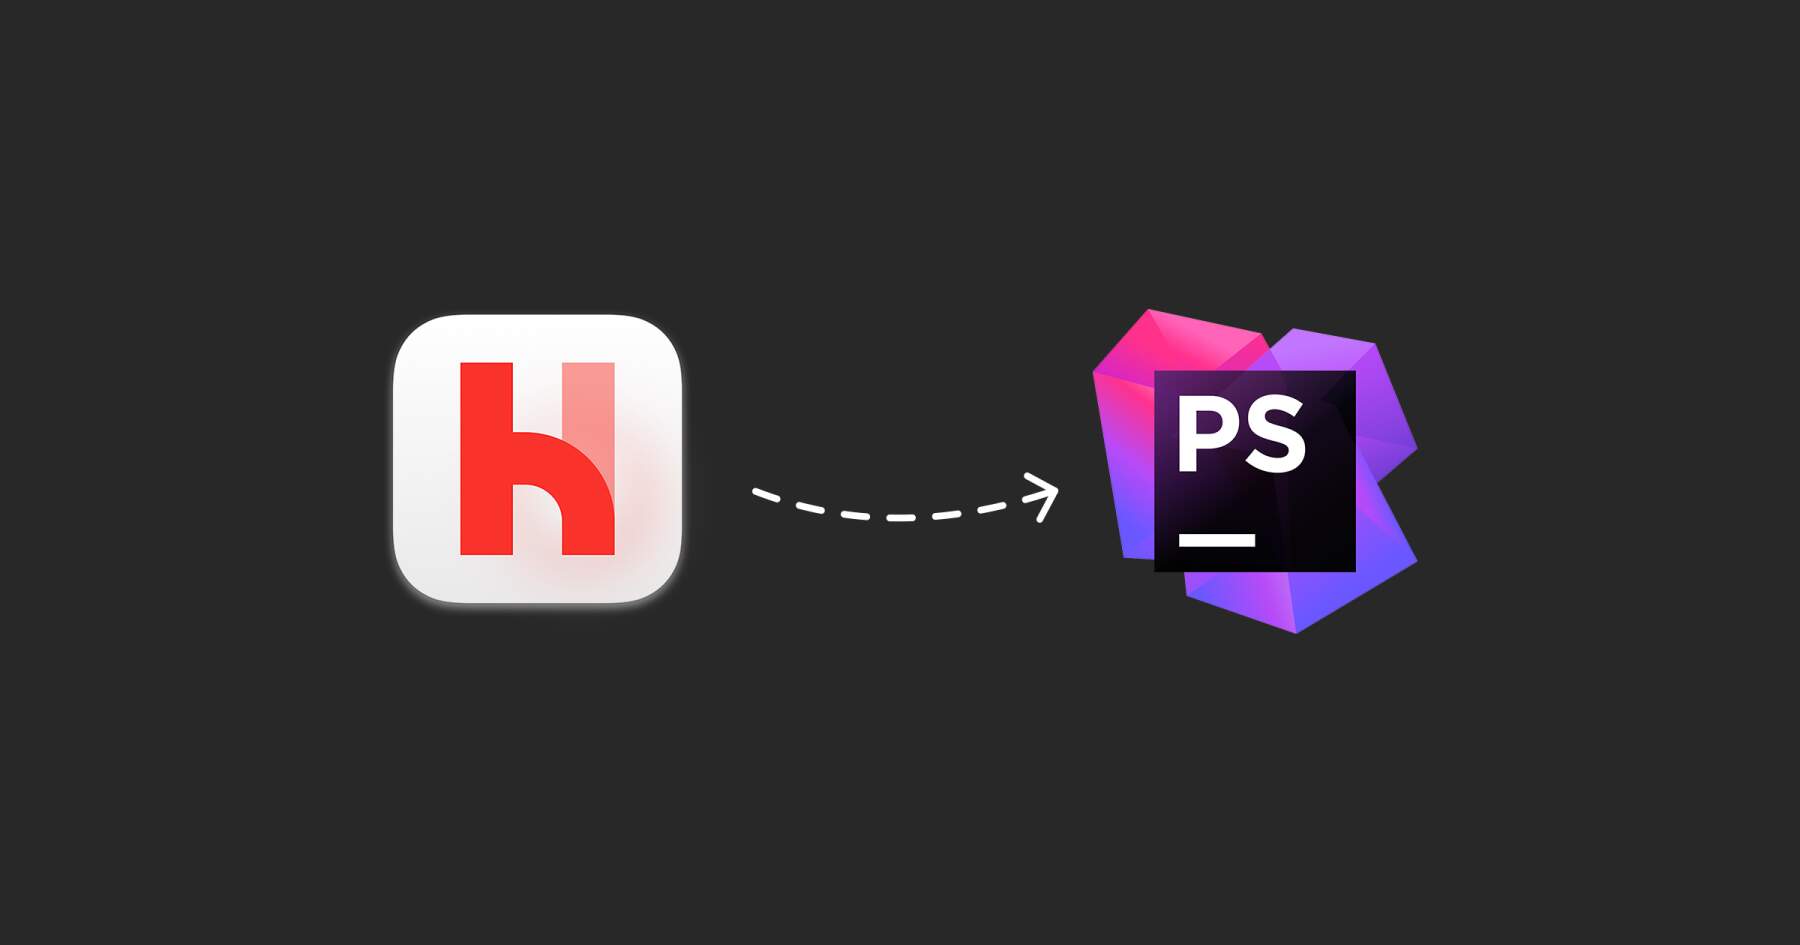 How to configure PhpStorm to use Laravel Herd's PHP